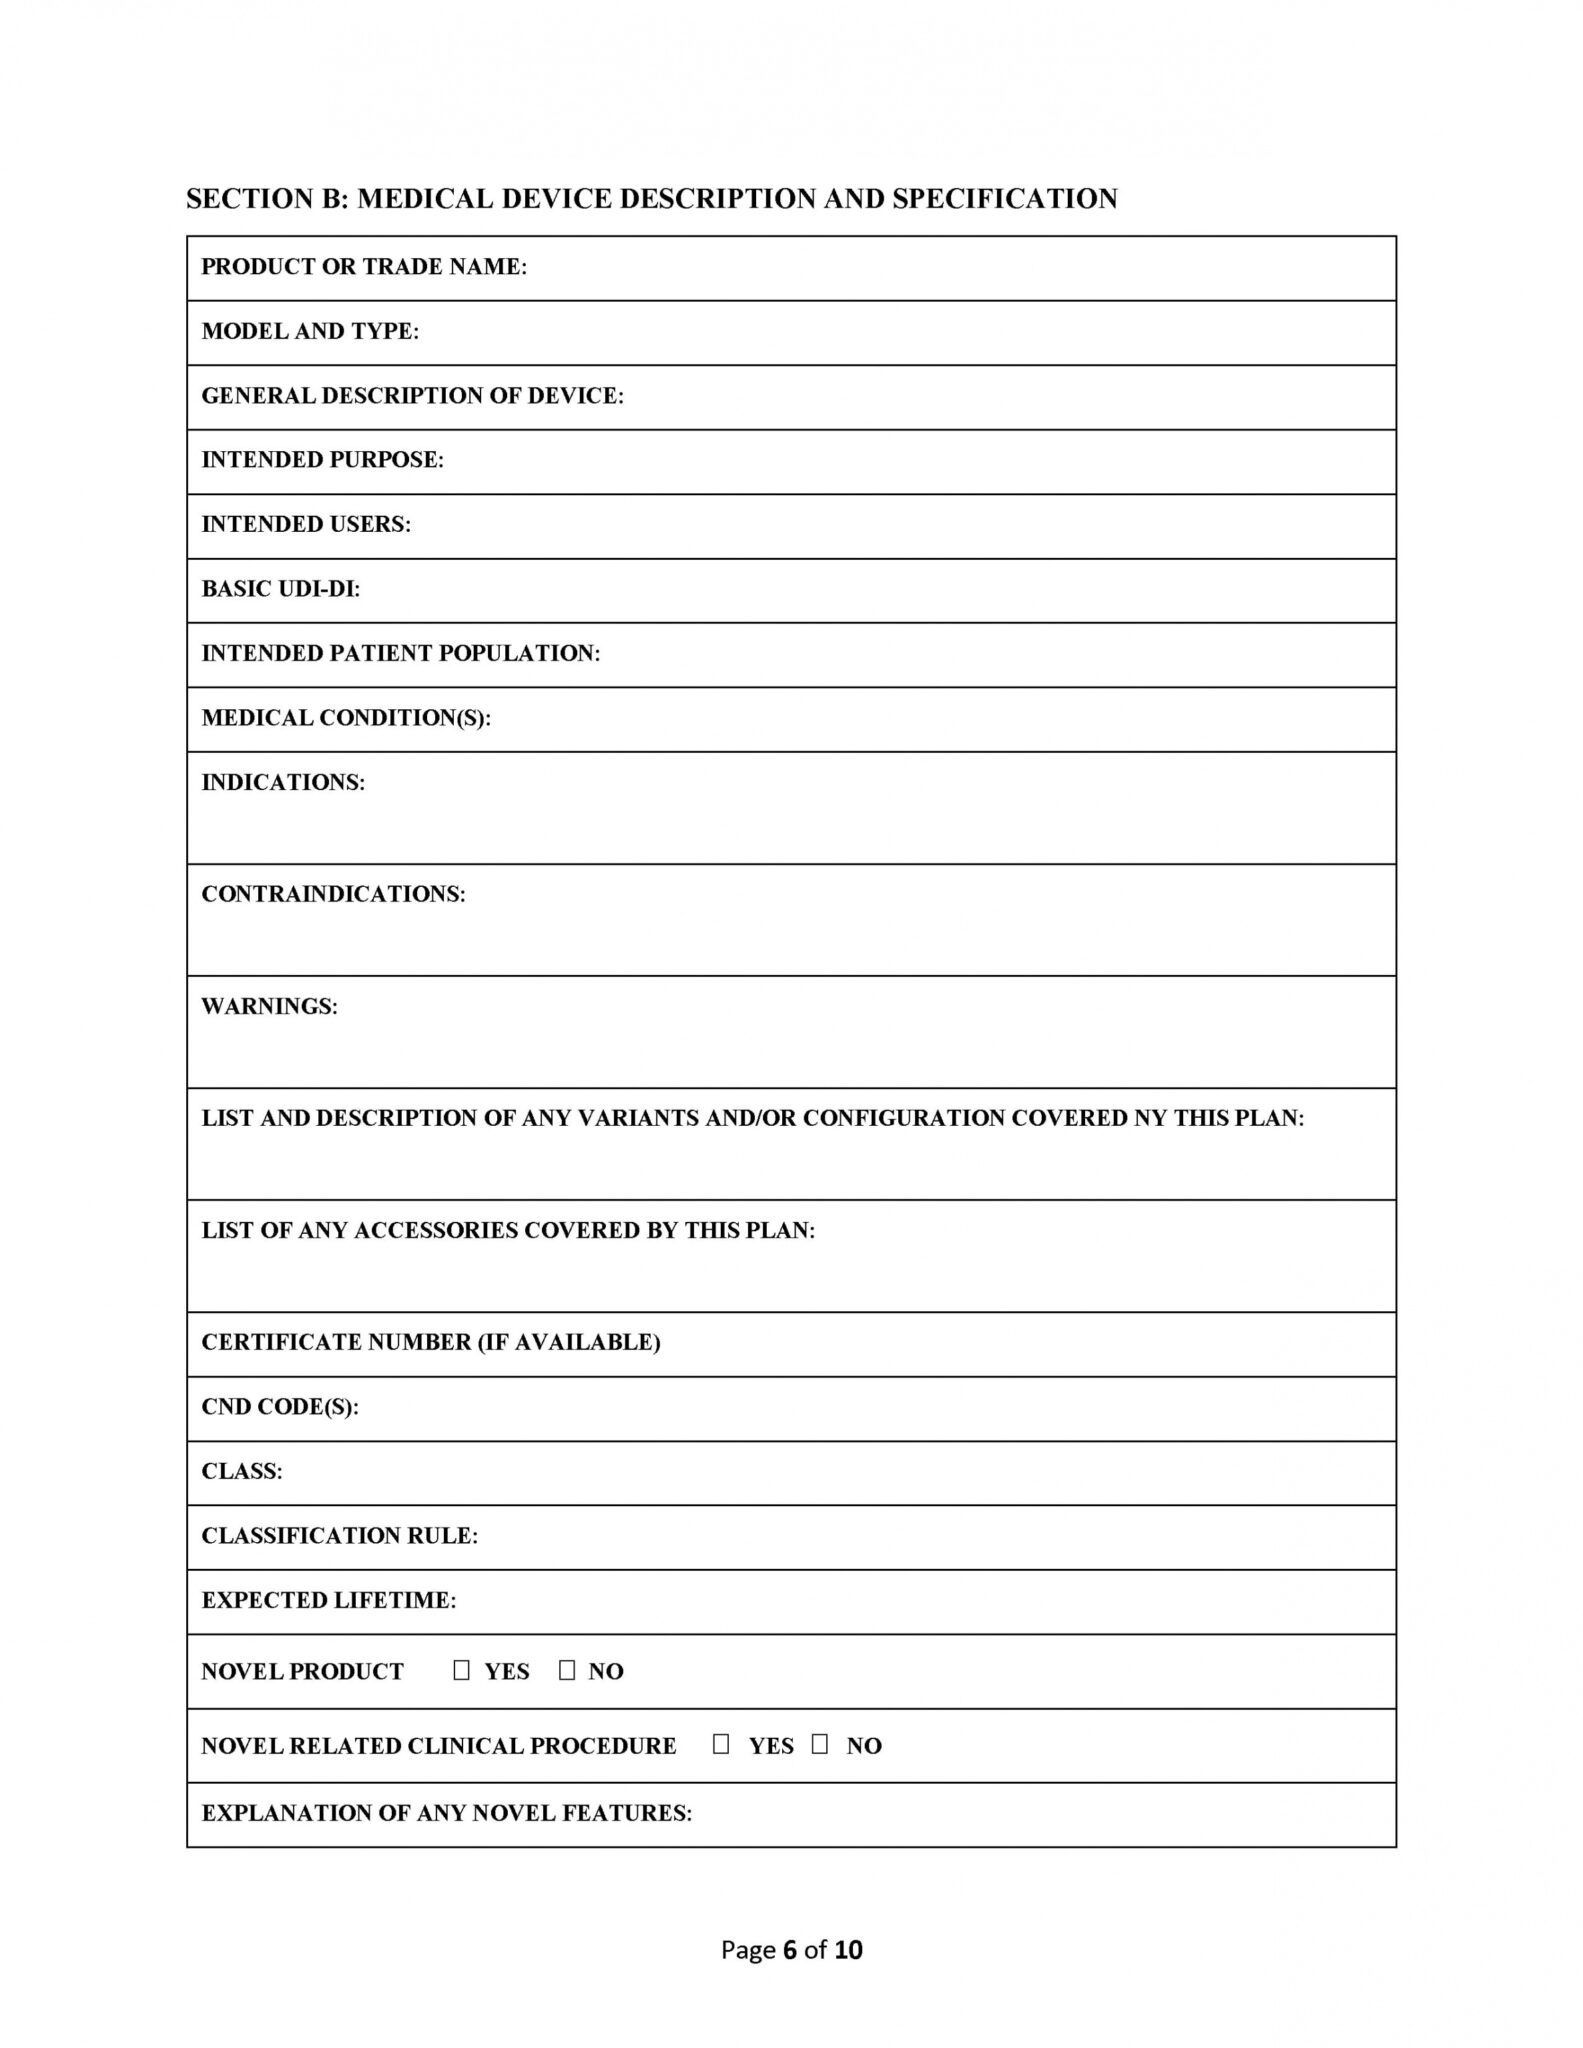 printable-guidance-on-pmcf-evaluation-report-template-excel-example